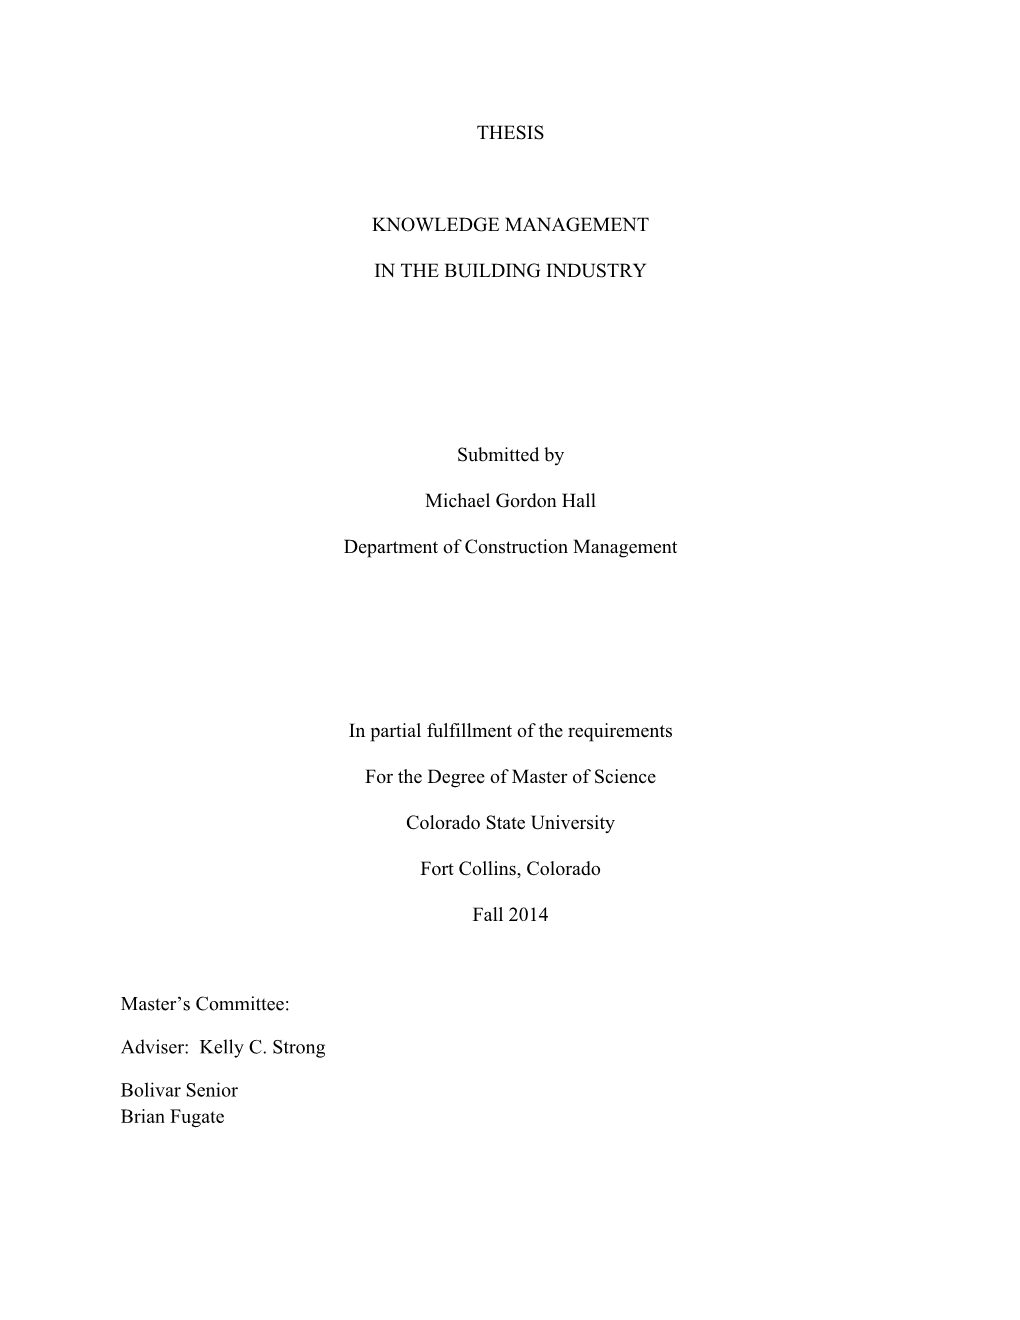 THESIS KNOWLEDGE MANAGEMENT in the BUILDING INDUSTRY Submitted by Michael Gordon Hall Department of Construction Management In